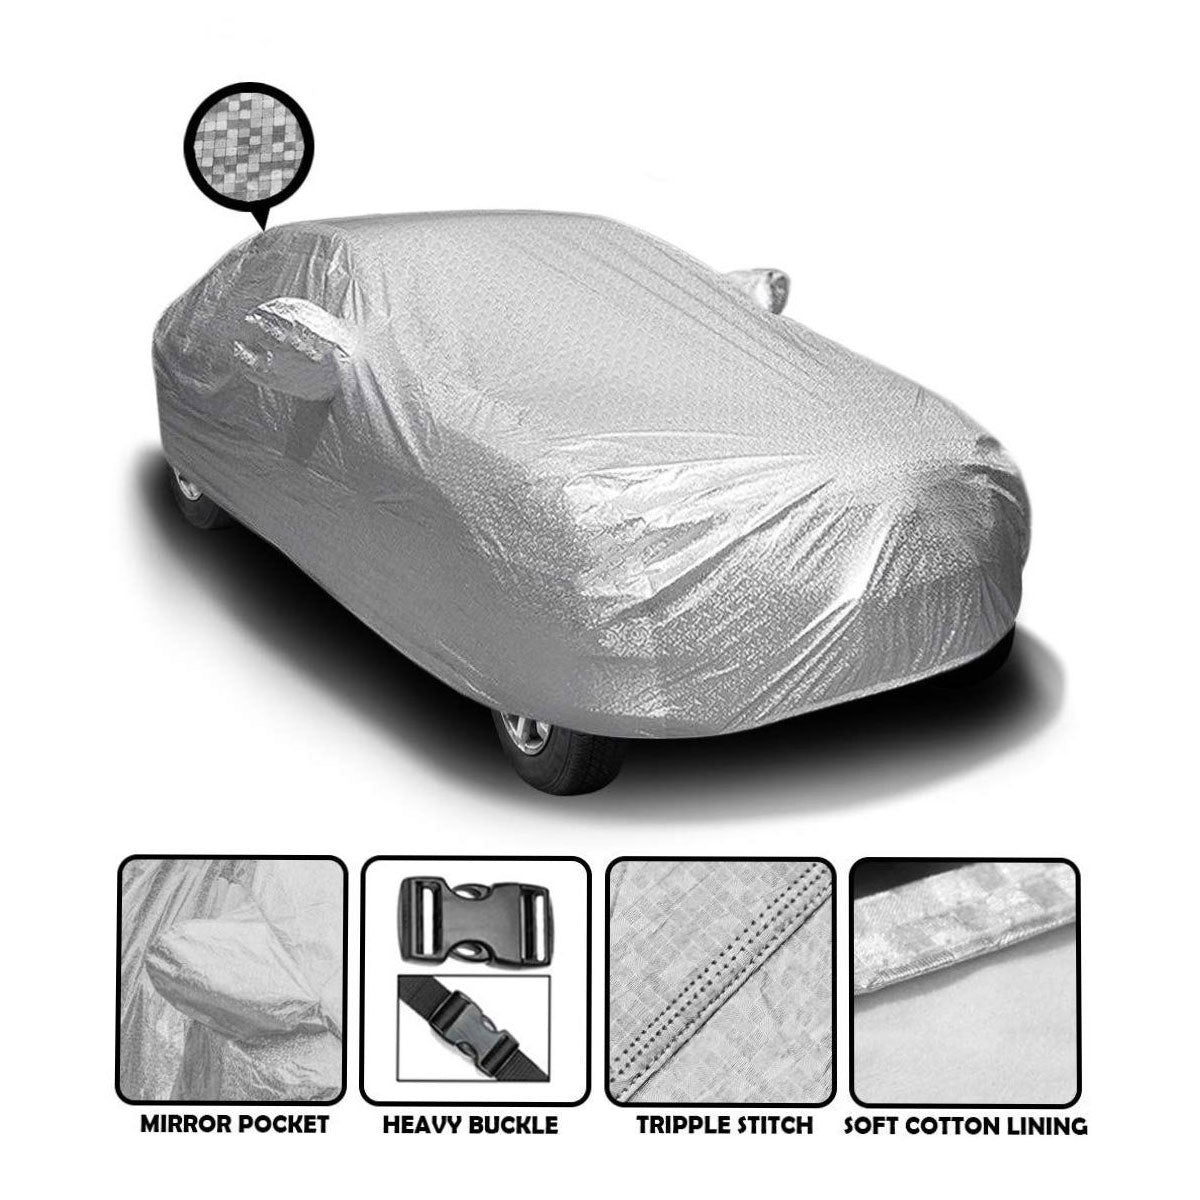 Oshotto Spyro Silver Anti Reflective, dustproof and Water Proof Car Body Cover with Mirror Pockets For MG Gloster